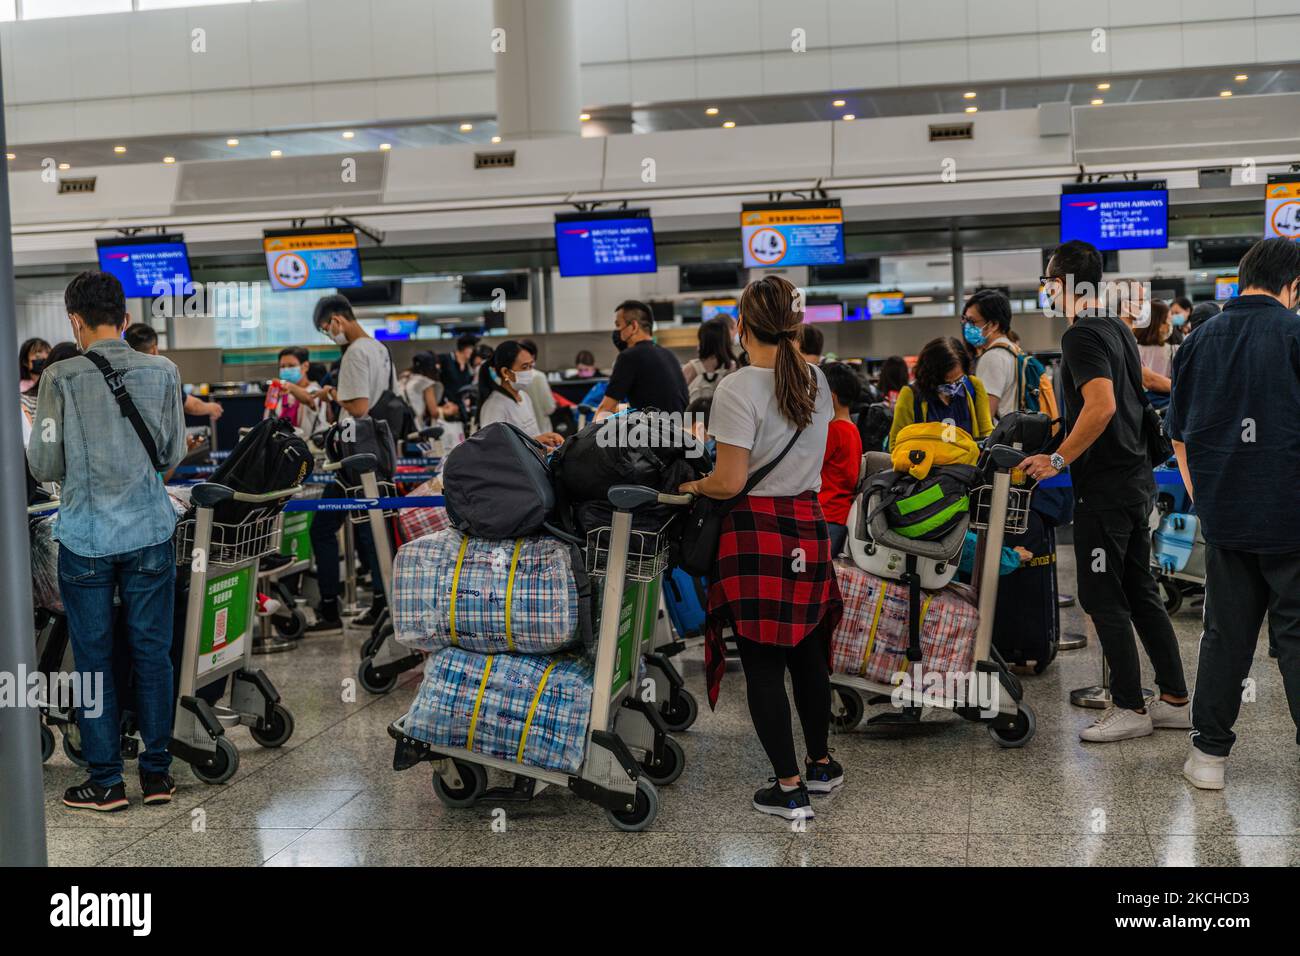 The check-in queue for British Airways in Hong Kong, China, 17 July 2021. Those chequered bags are known by Hongkongers as being a tell-tale sign of migration. (Photo by Marc Fernandes/NurPhoto) Stock Photo